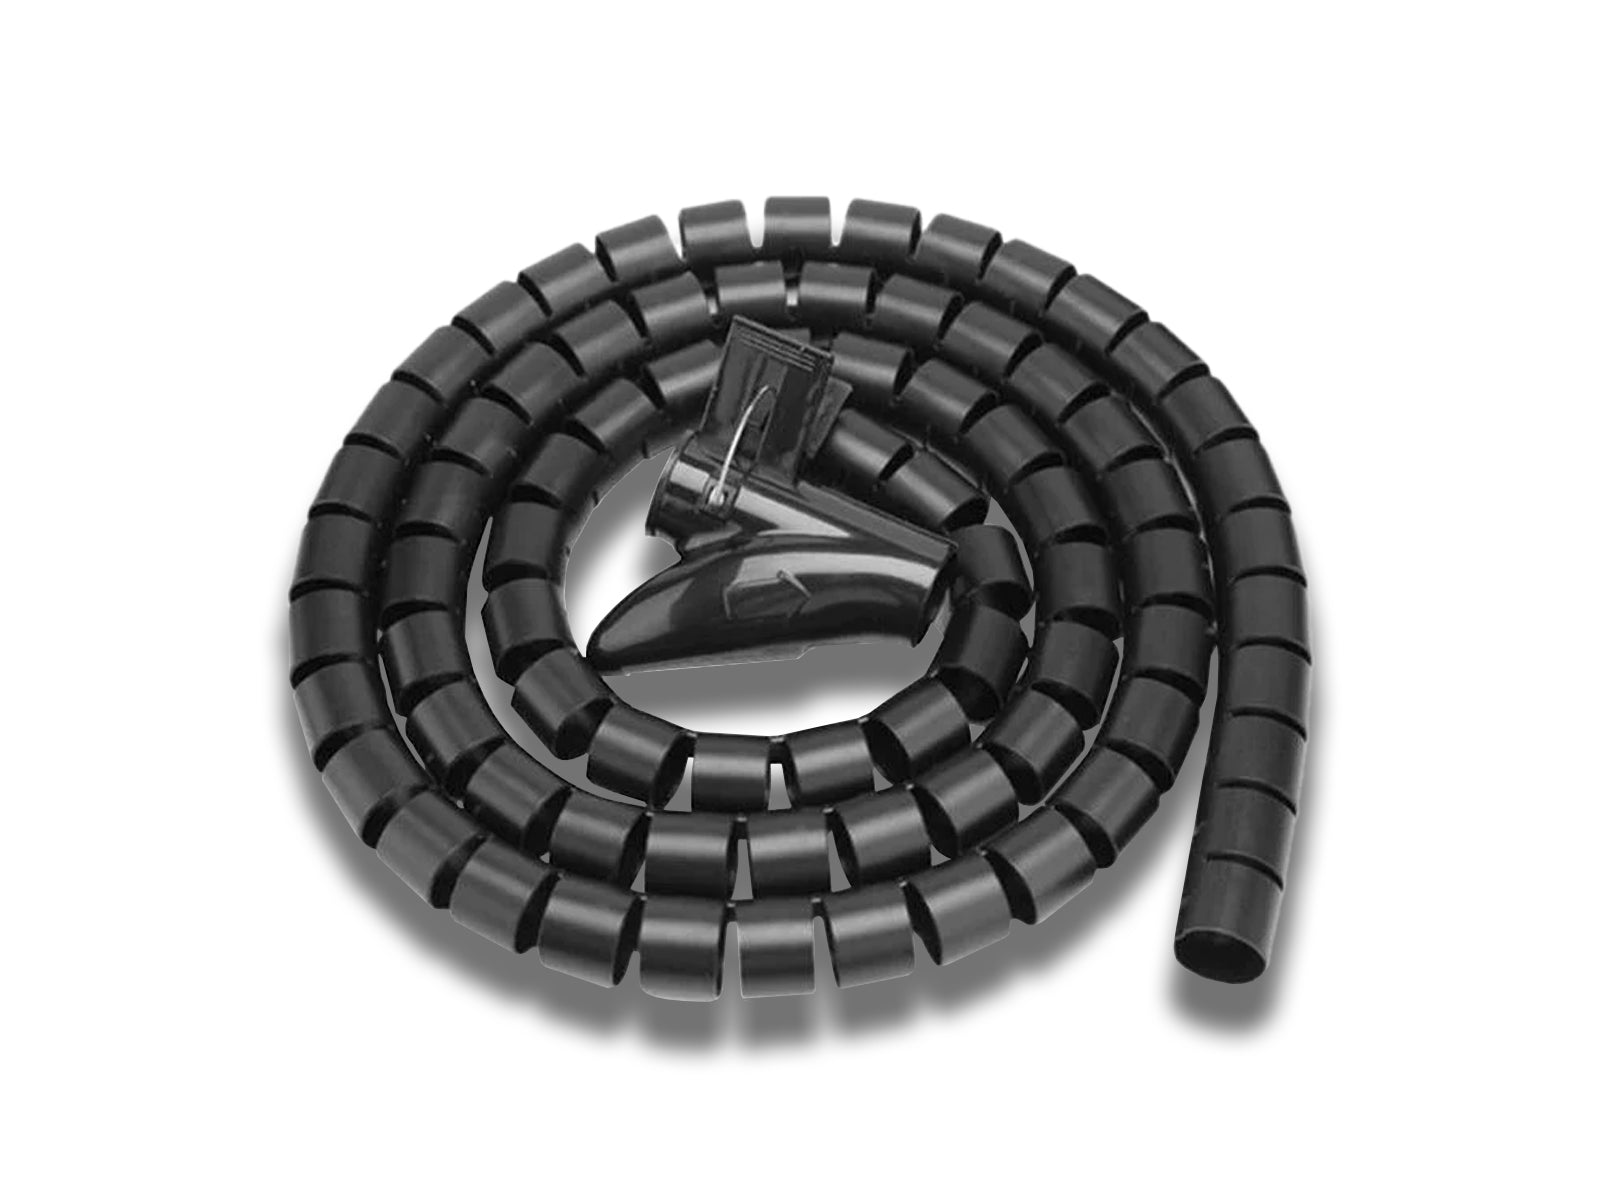 Image-of-the-spiral-cable-wrap-on-the-white-background